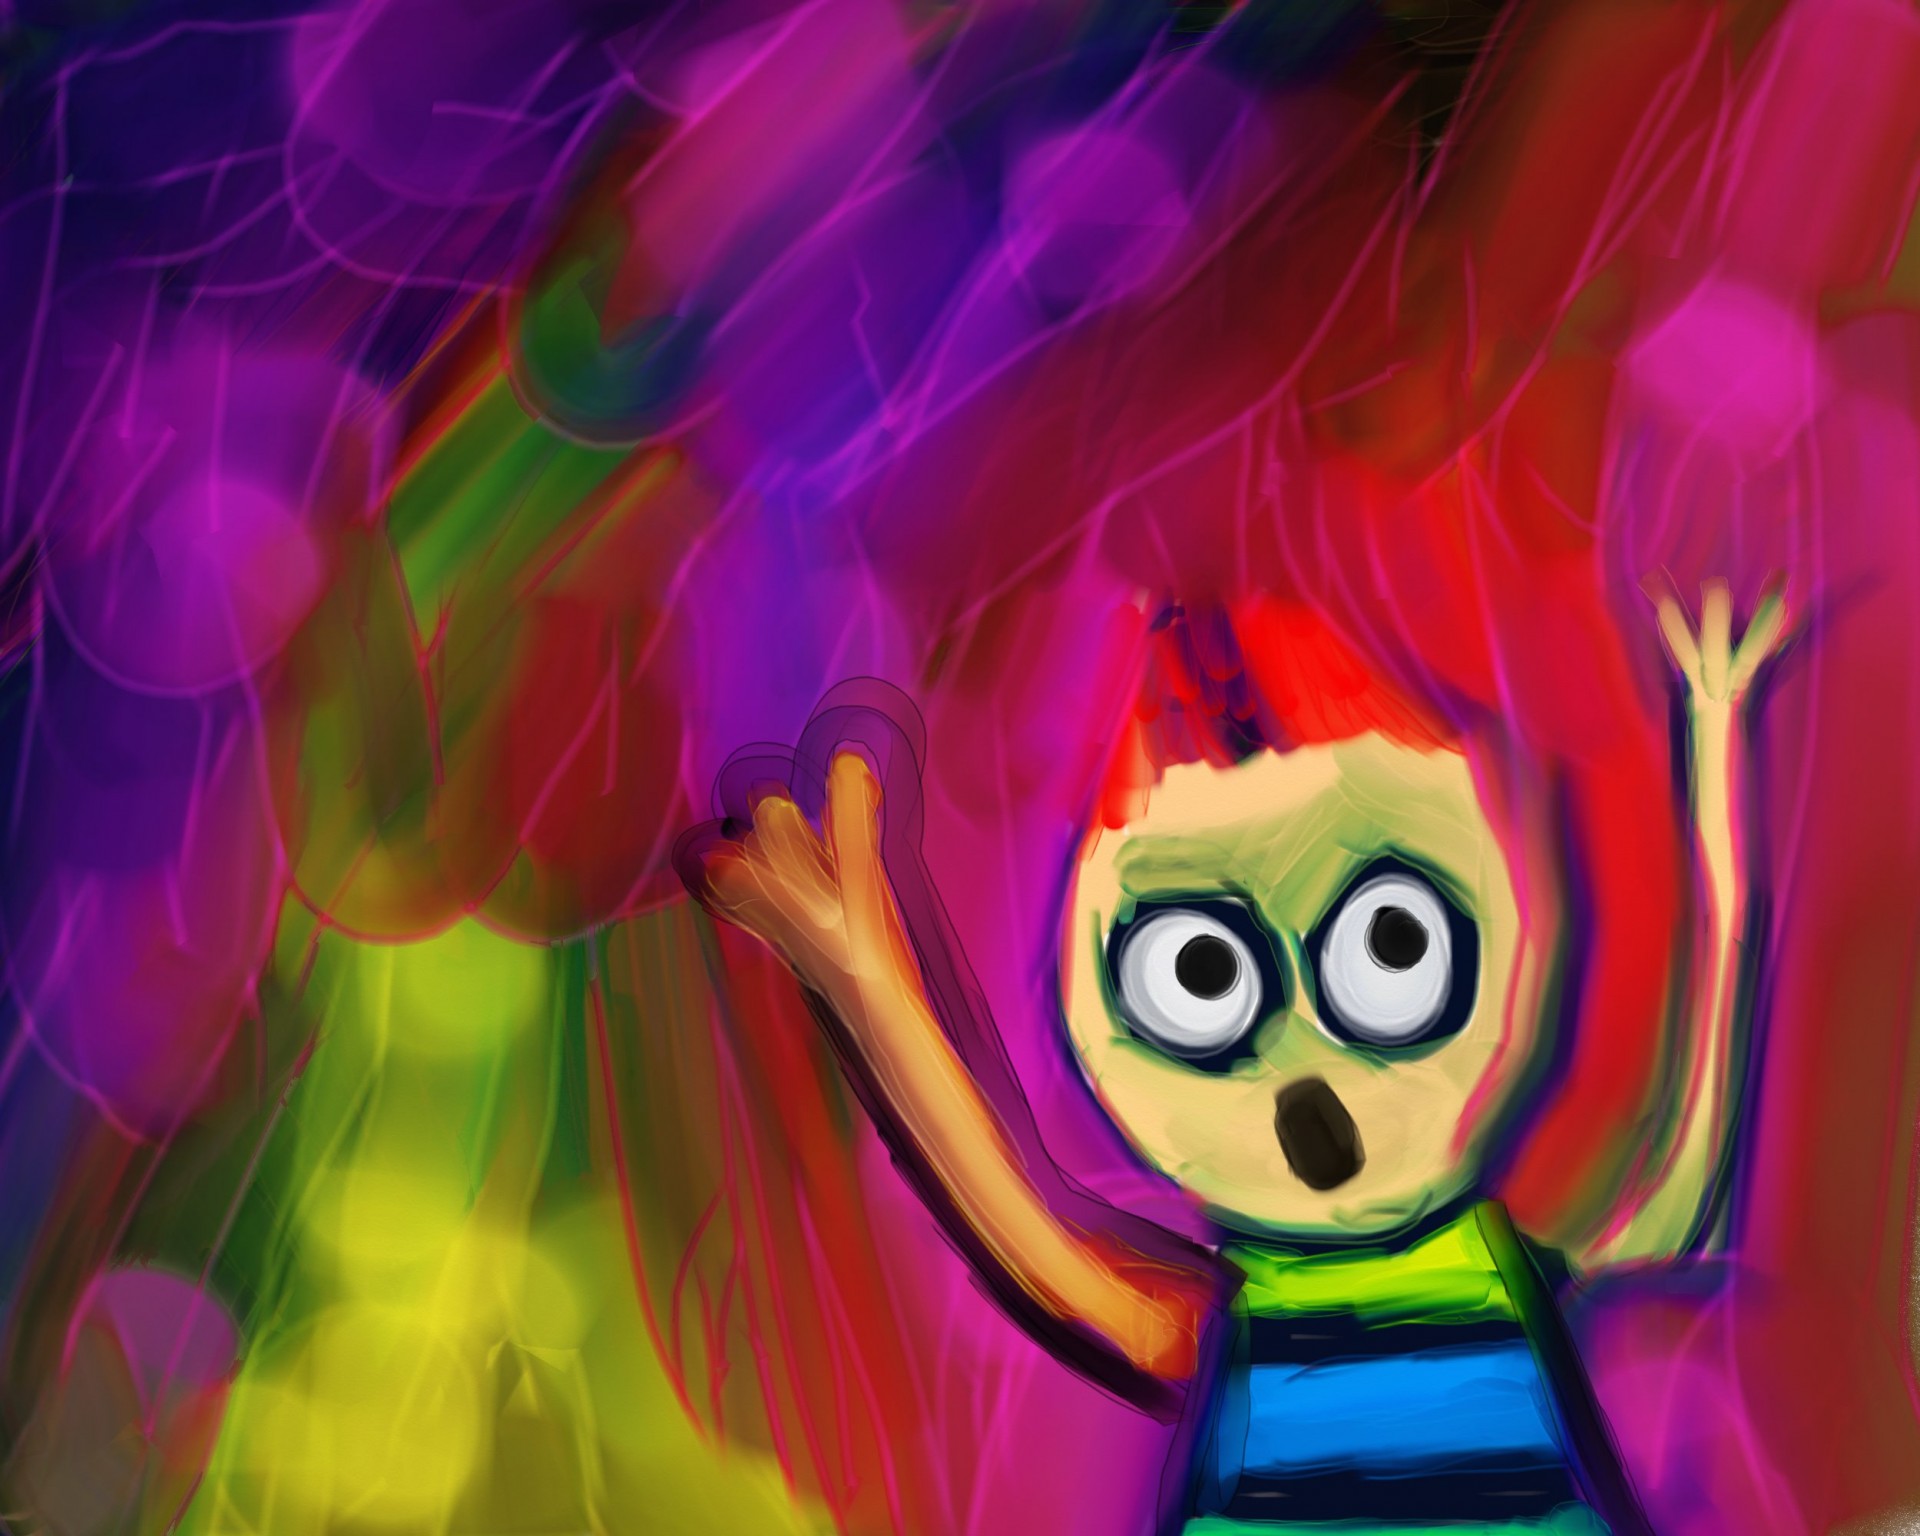 Digitally created colourful painting of a cartoon character screaming with his hands in the air.